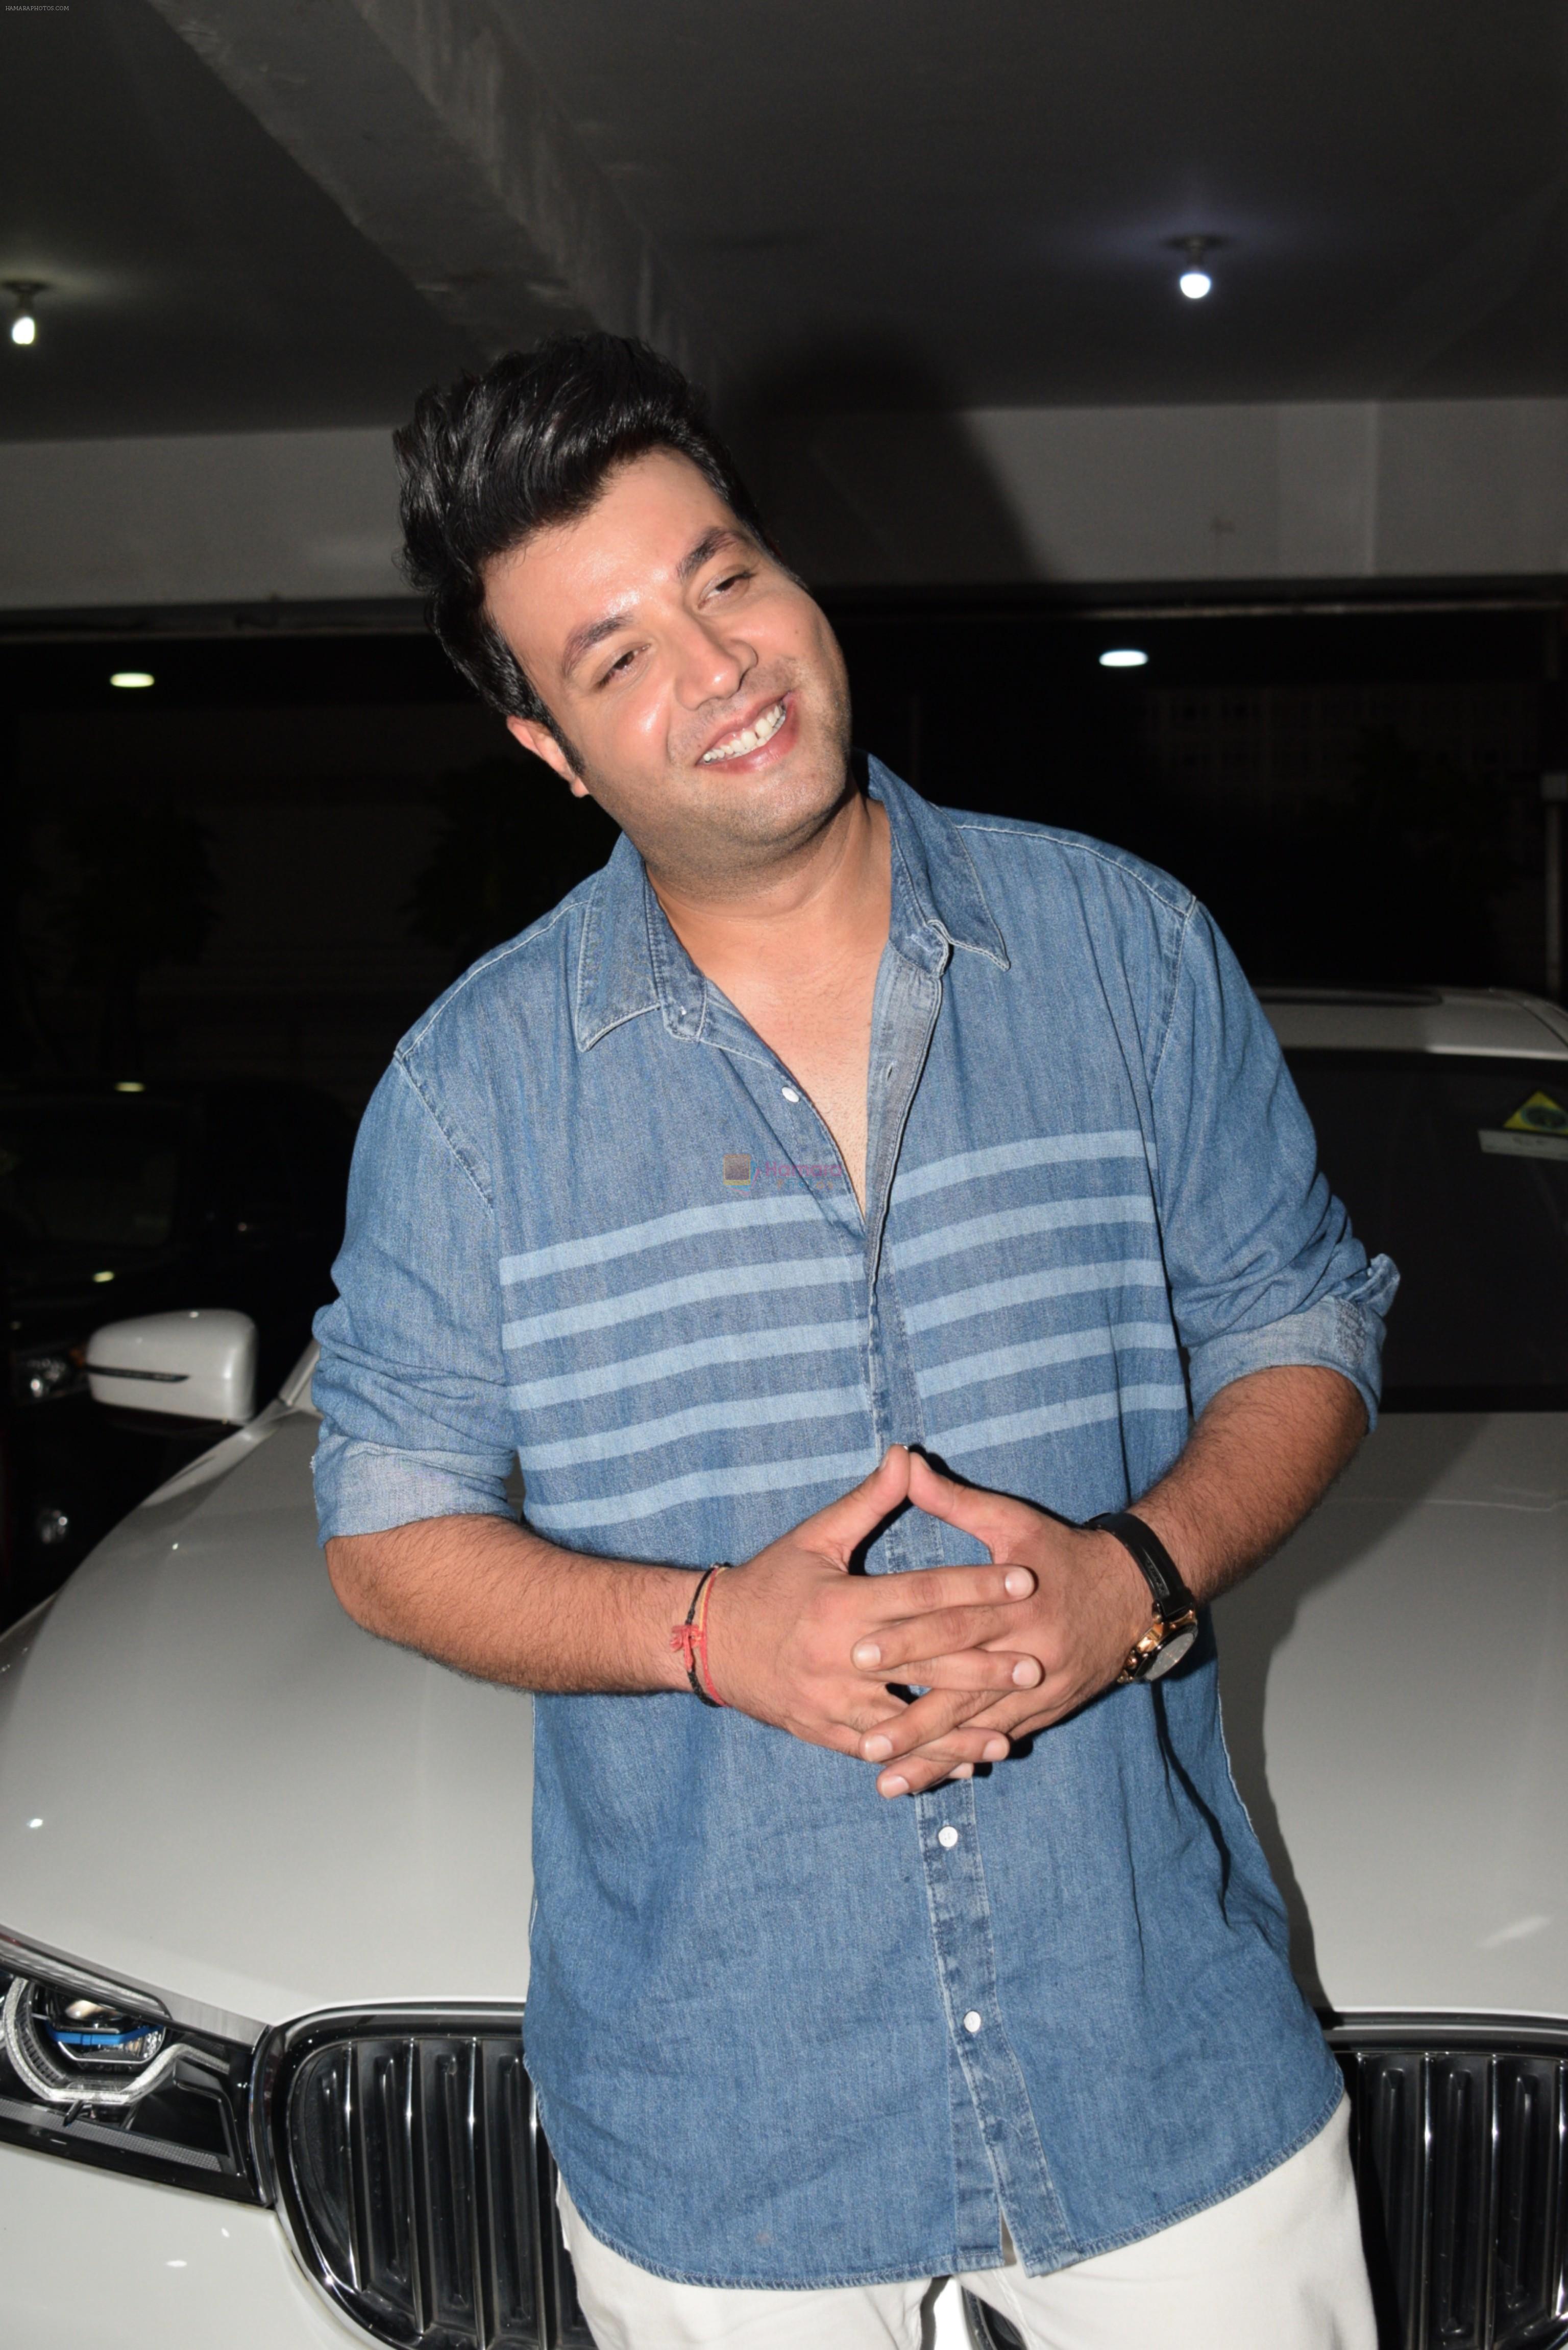 Varun Sharma for the promotions of film Khandaani Shafakhana at Tseries office in andheri on 21st June 2019